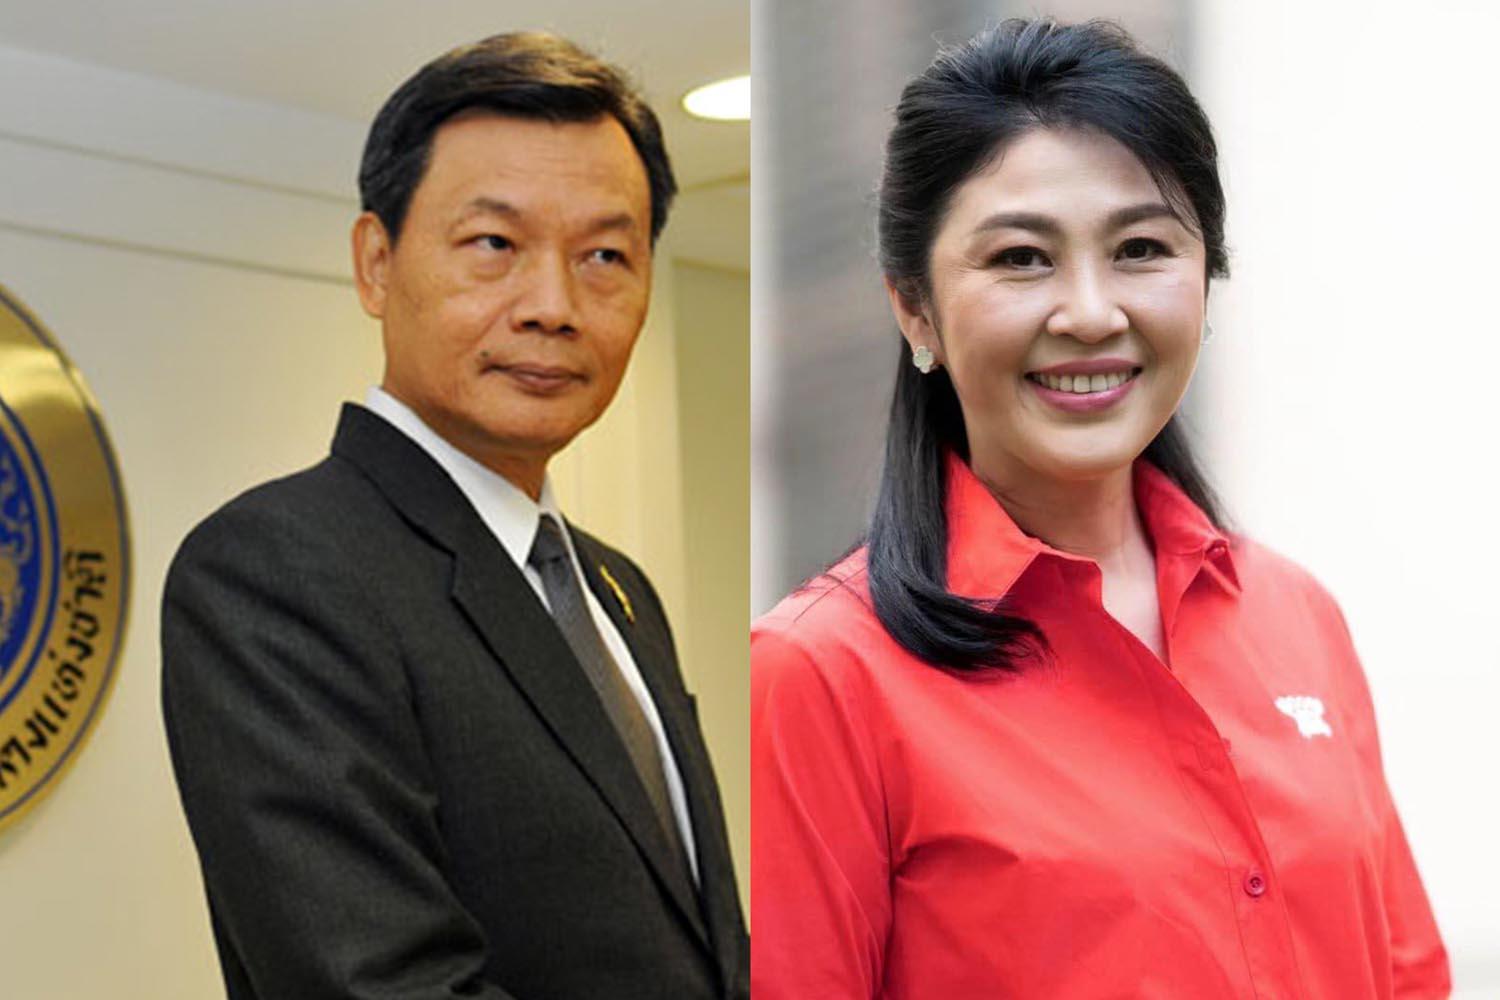 court-cancel-reading-the-judgment-case-of-Yingluck-transferring-position-of-Tawin-SPACEBAR-Hero.jpg